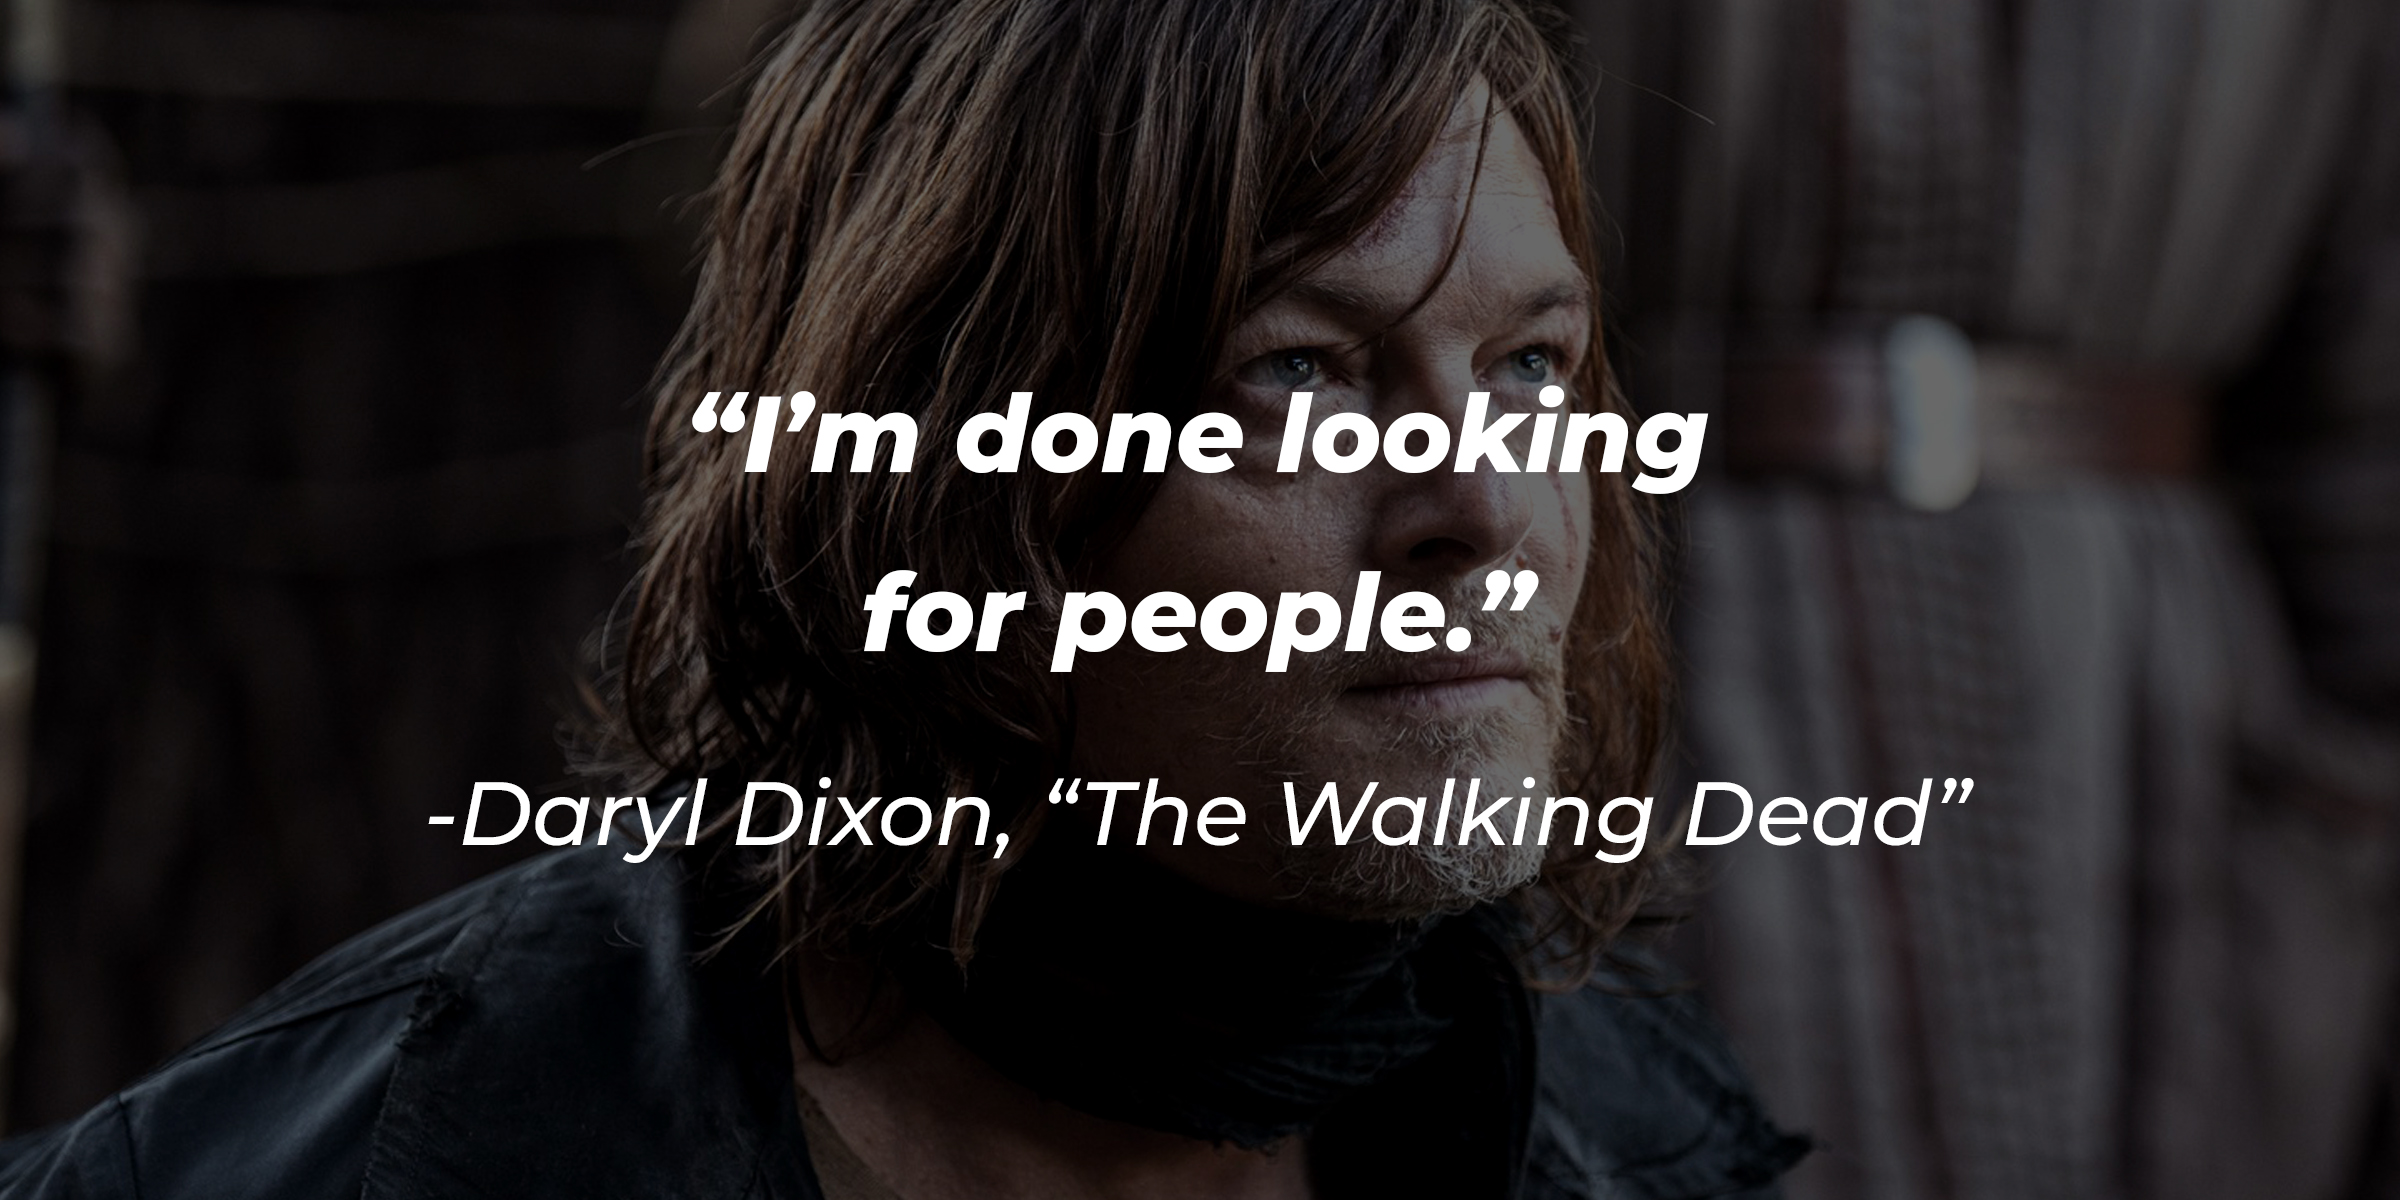 Daryl Dixon's image with his quote: "I'm done looking for people." | Source: Facebook.com/TheWalkingDead